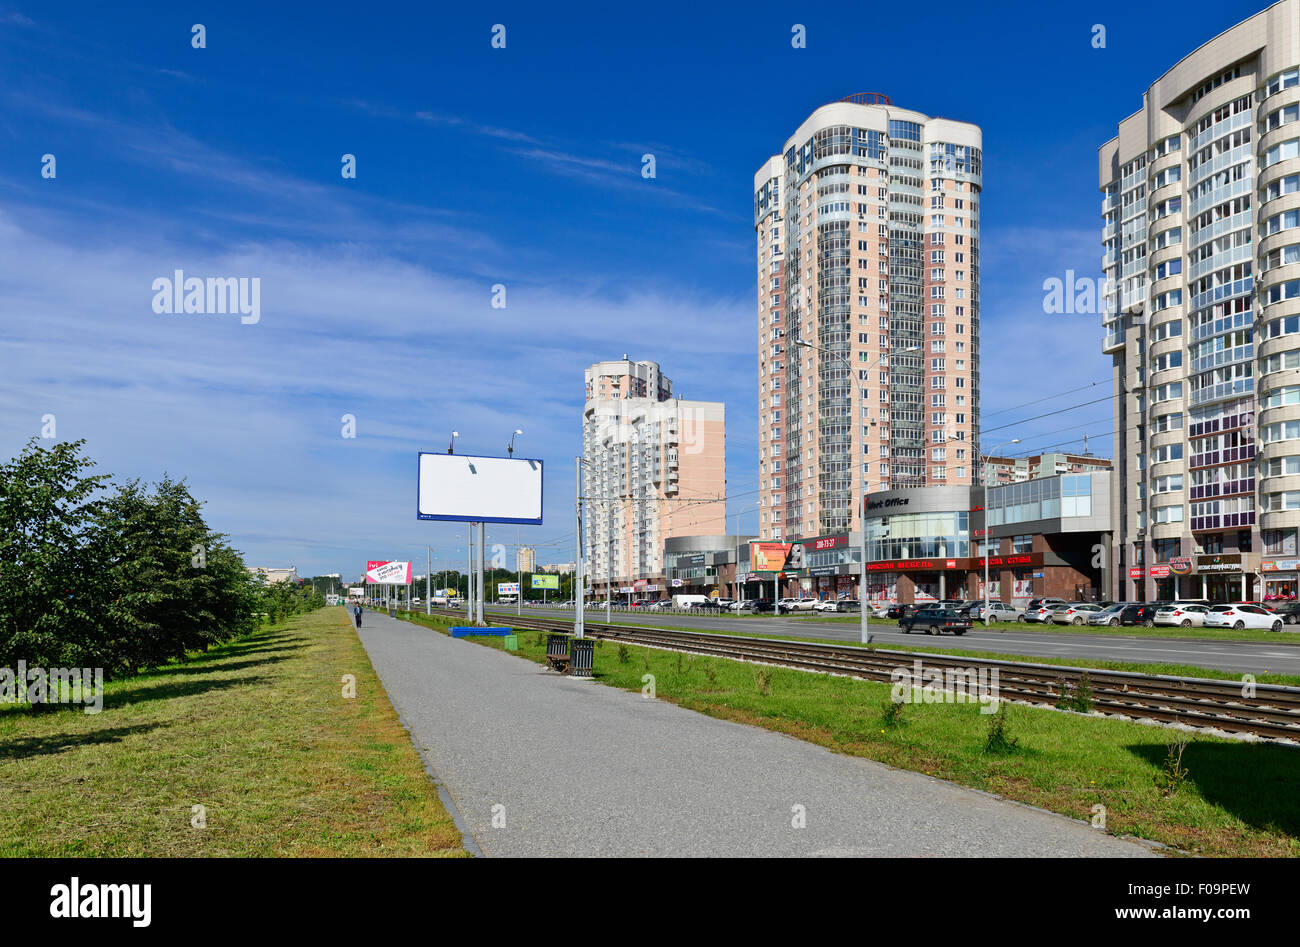 EKATERINBURG, RUSSIA -AUGUST 09, 2015: Residential  building. Fuecheck street. The population of Ekaterinburg is 1.5 million Stock Photo